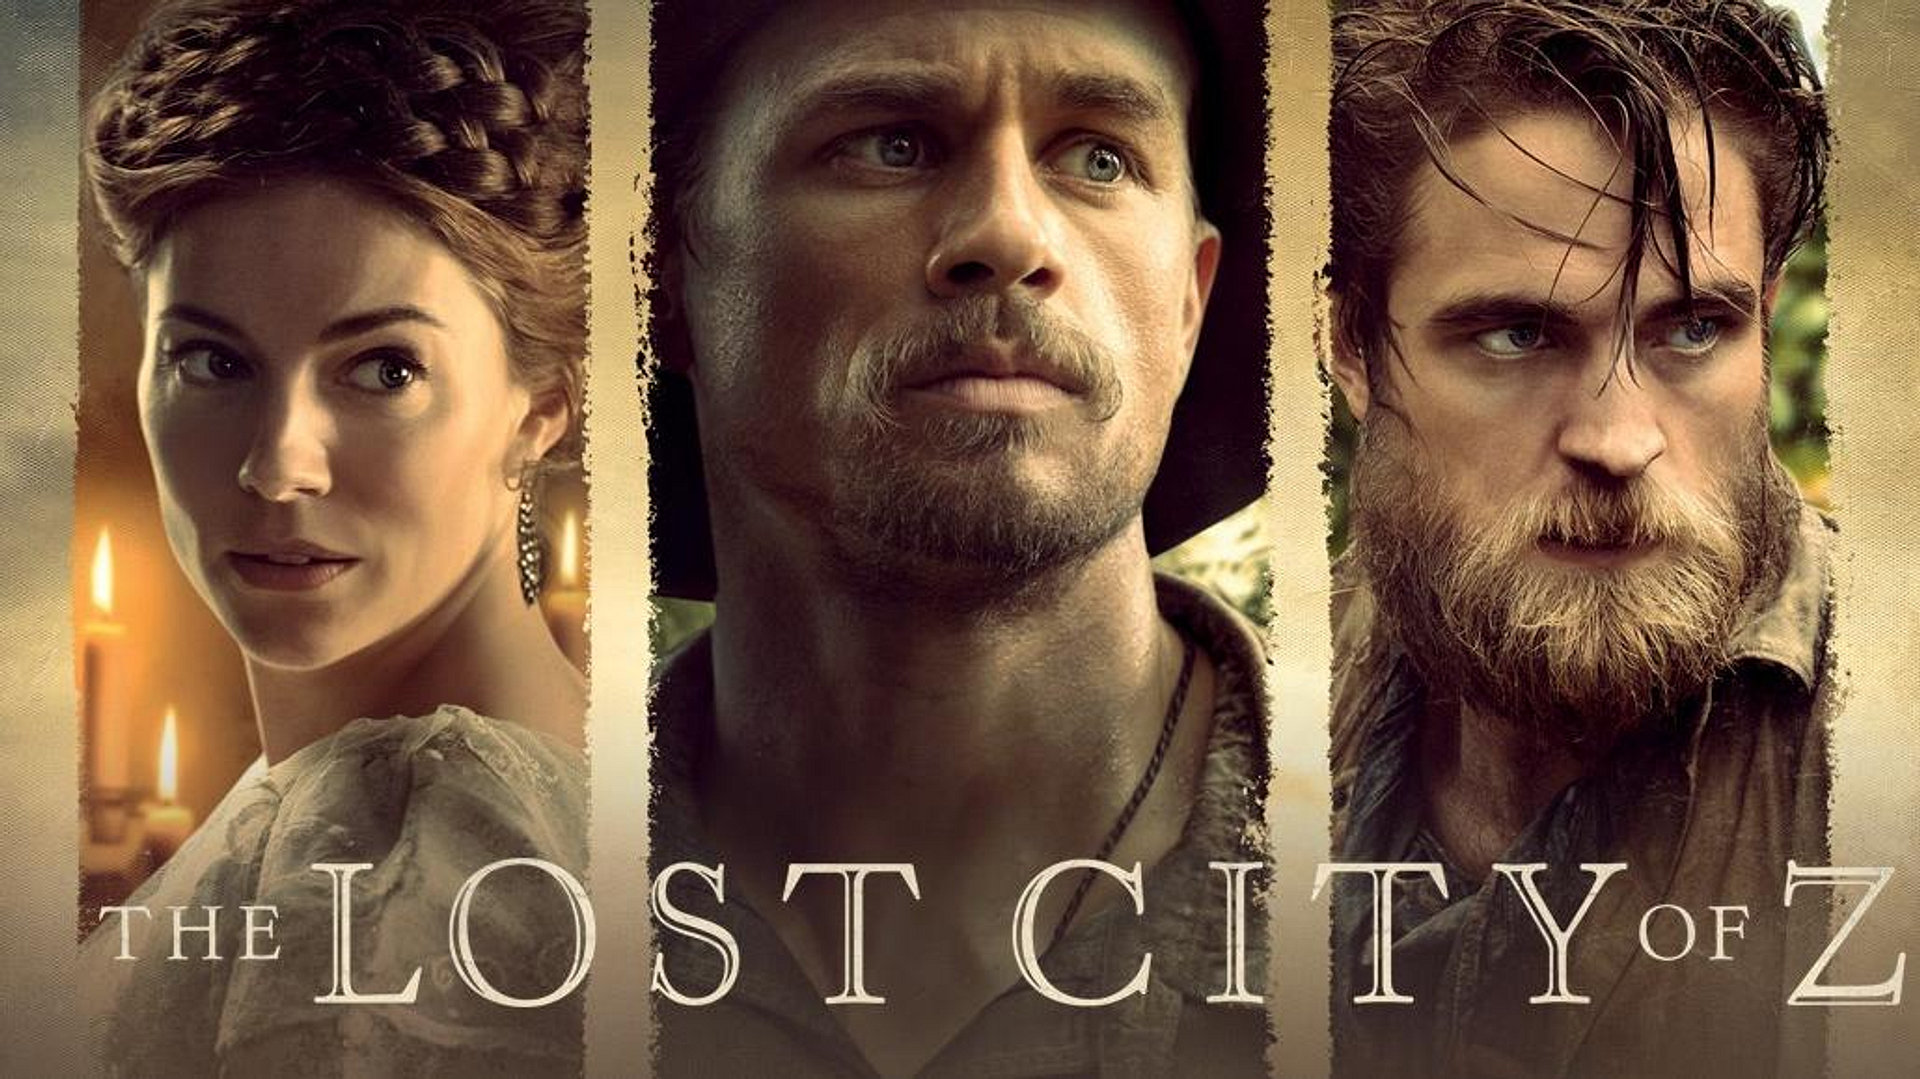 The Lost city of Z